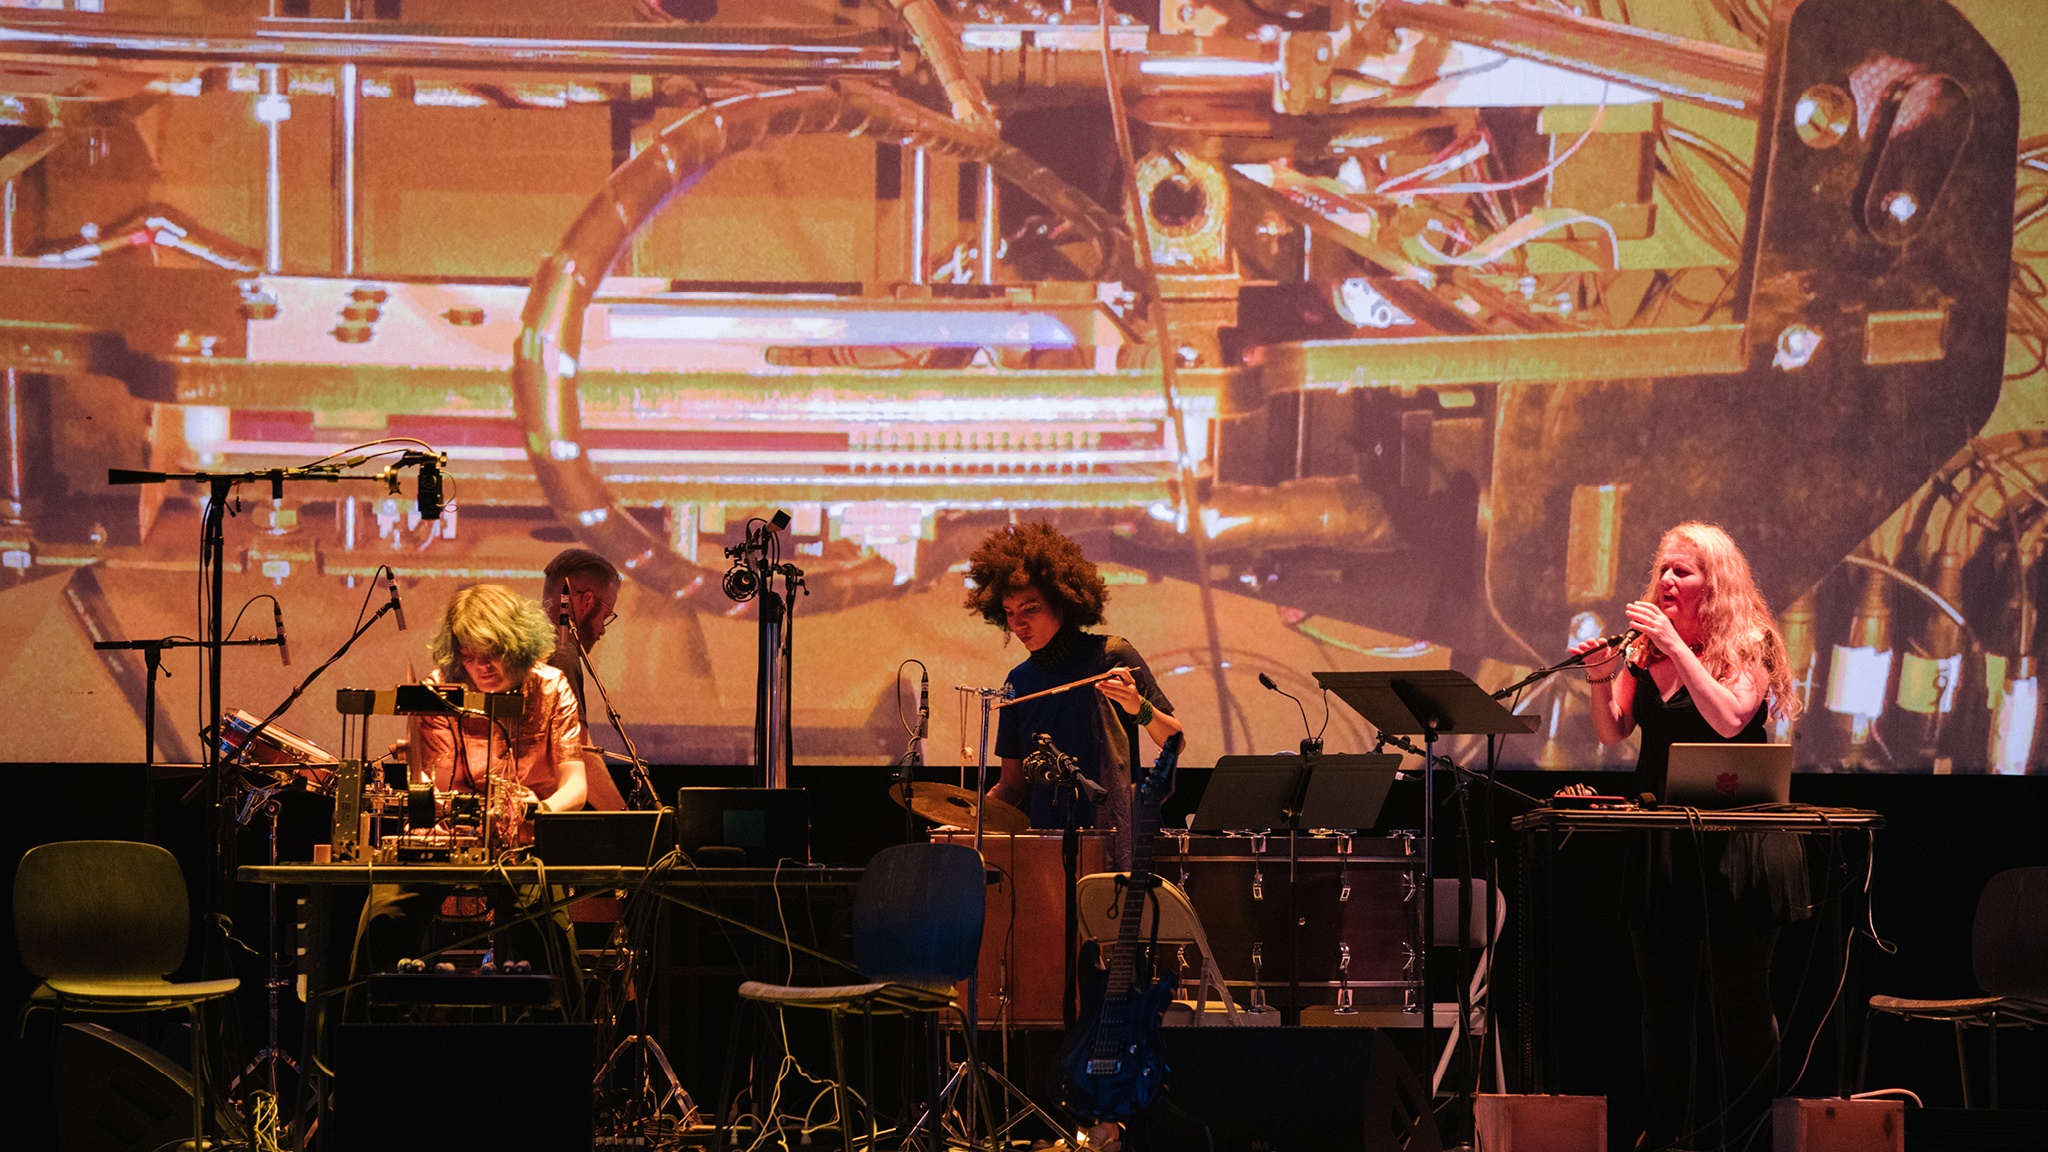 Three musicians on stage perform amid keyboards, microphones, and other instruments. Behind them is a large projection of a close up of technological machinery. 